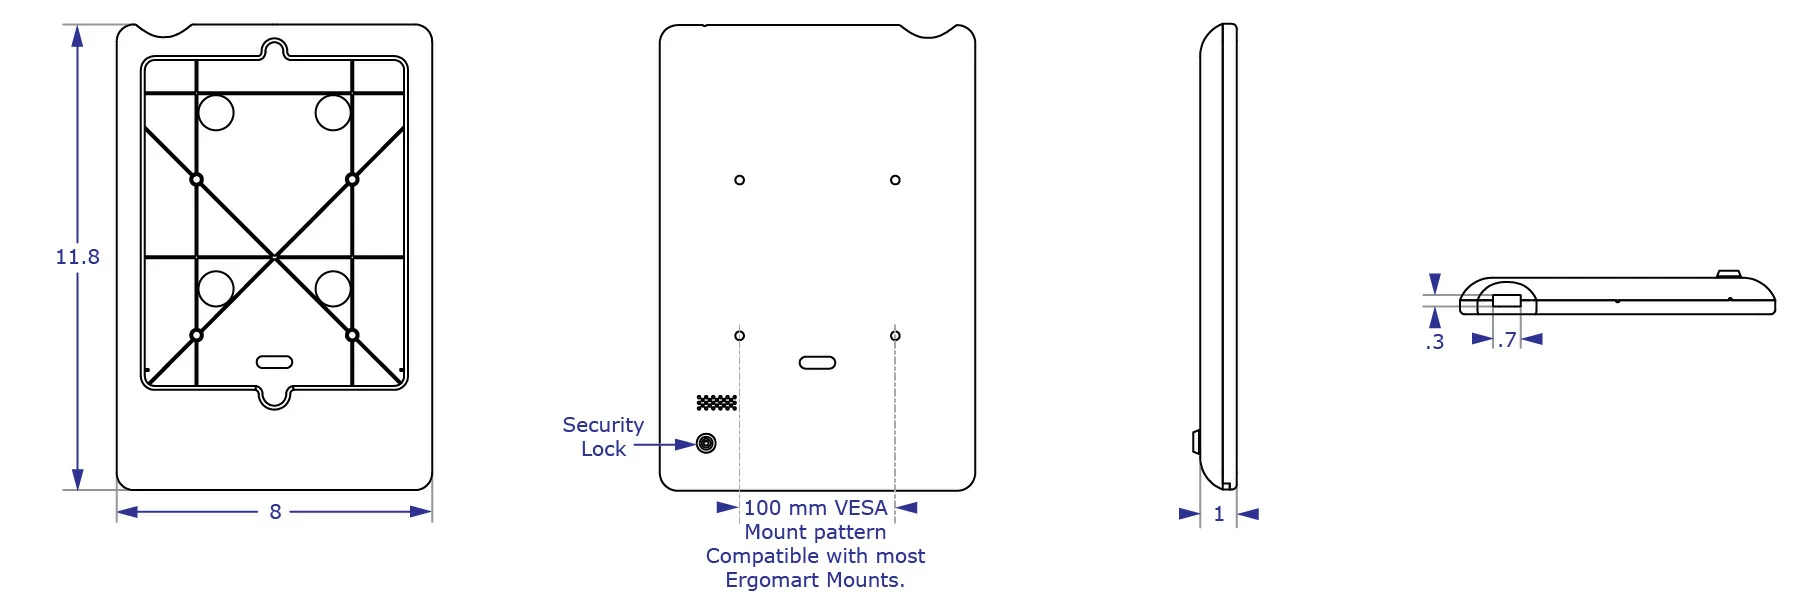 IPA3 Specification drawings of VESA mountable ipad tablet enclosure from front, back, side and bottom views